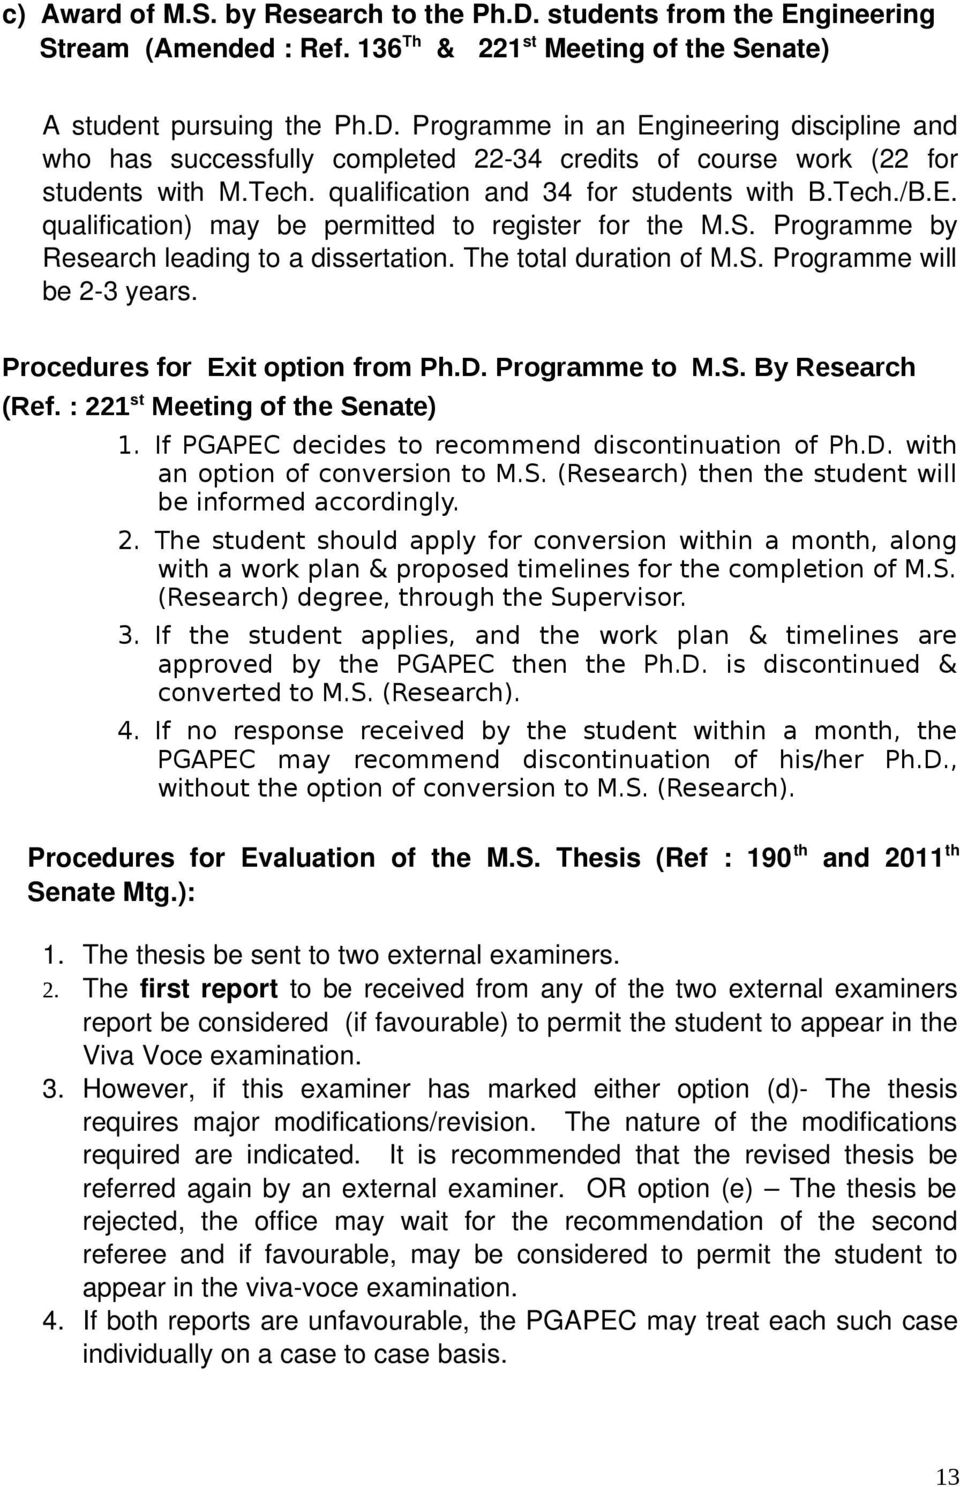 Procedures for Exit option from Ph.D. Programme to M.S. By Research (Ref. : 221 st Meeting of the Senate) 1. If PGAPEC decides to recommend discontinuation of Ph.D. with an option of conversion to M.